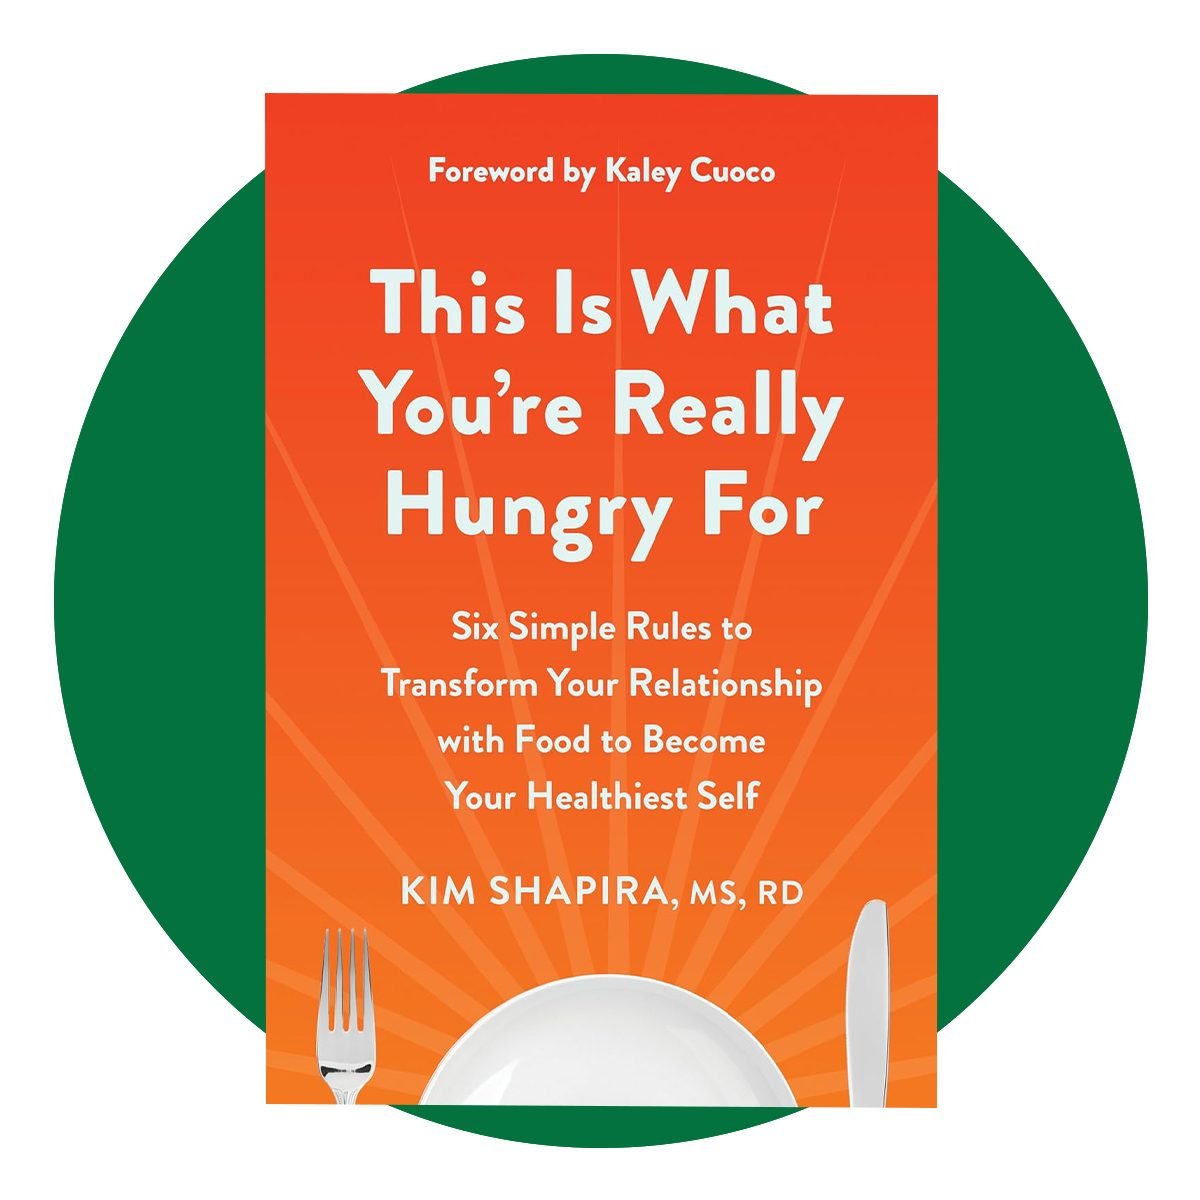 This Is What You're Really Hungry For book cover